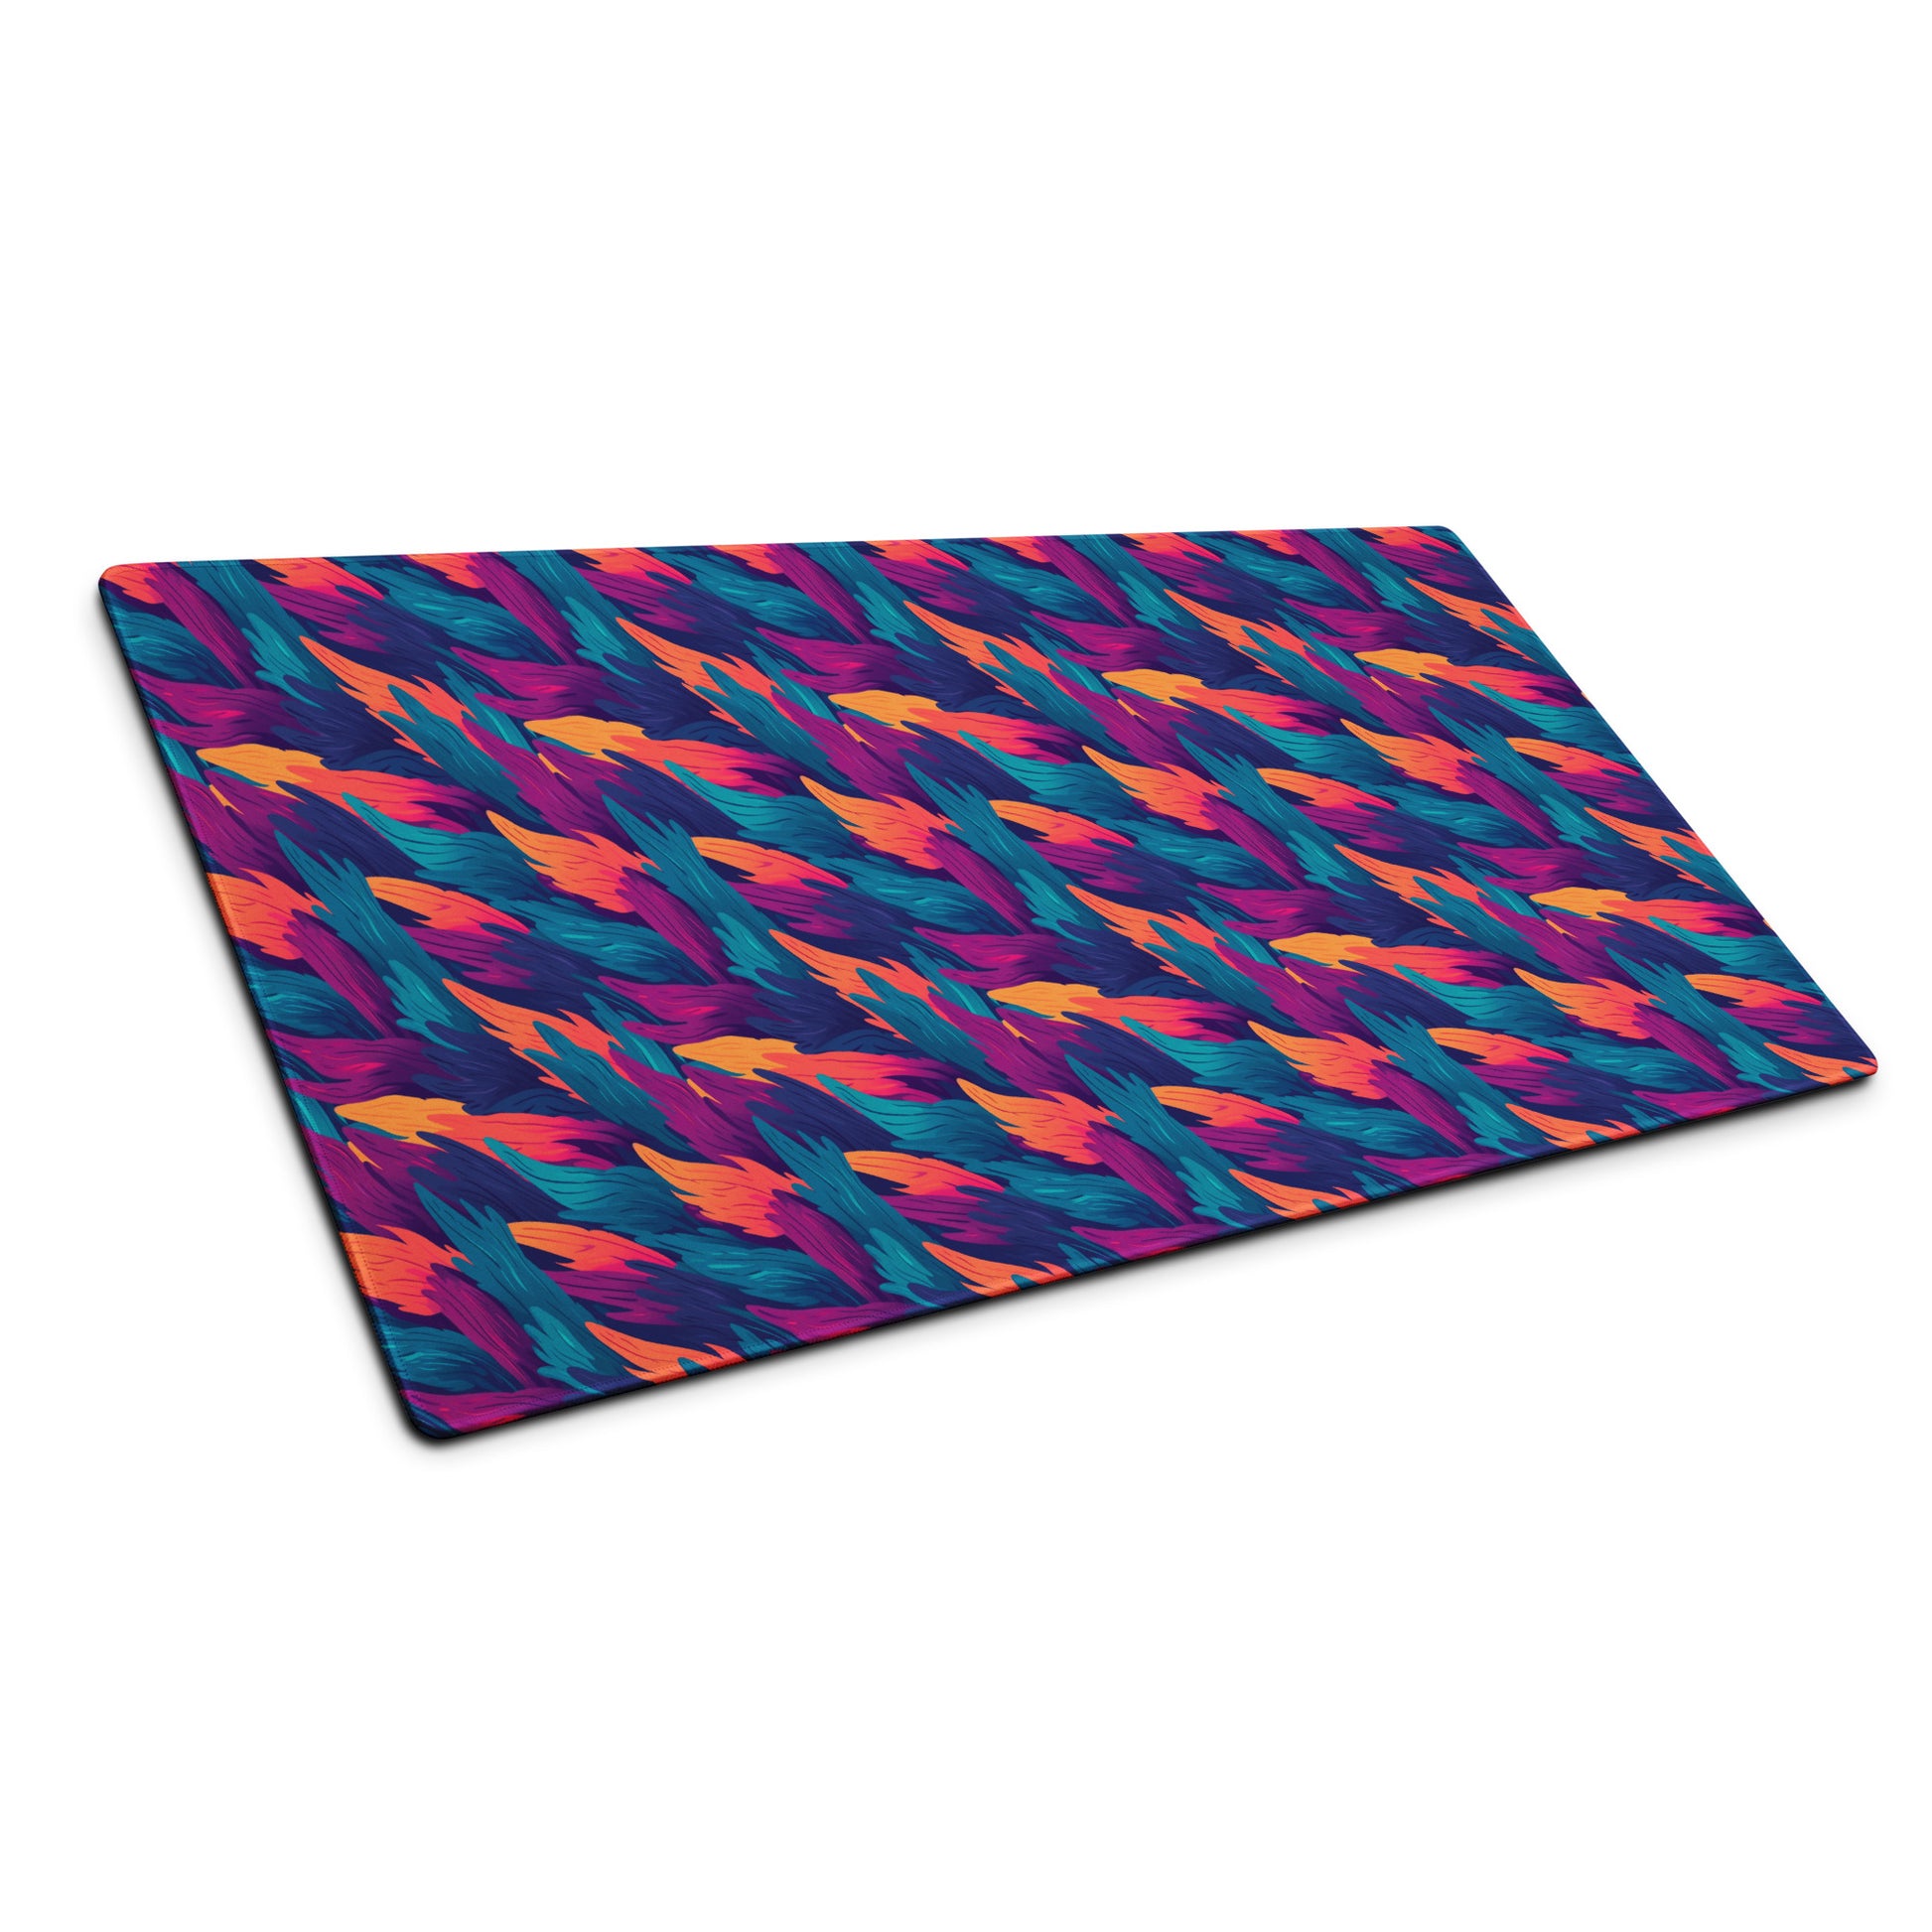 A 36" x 18" desk pad with a wavy flame pattern on it shown at an angle. Blue, Orange and Purple in color.